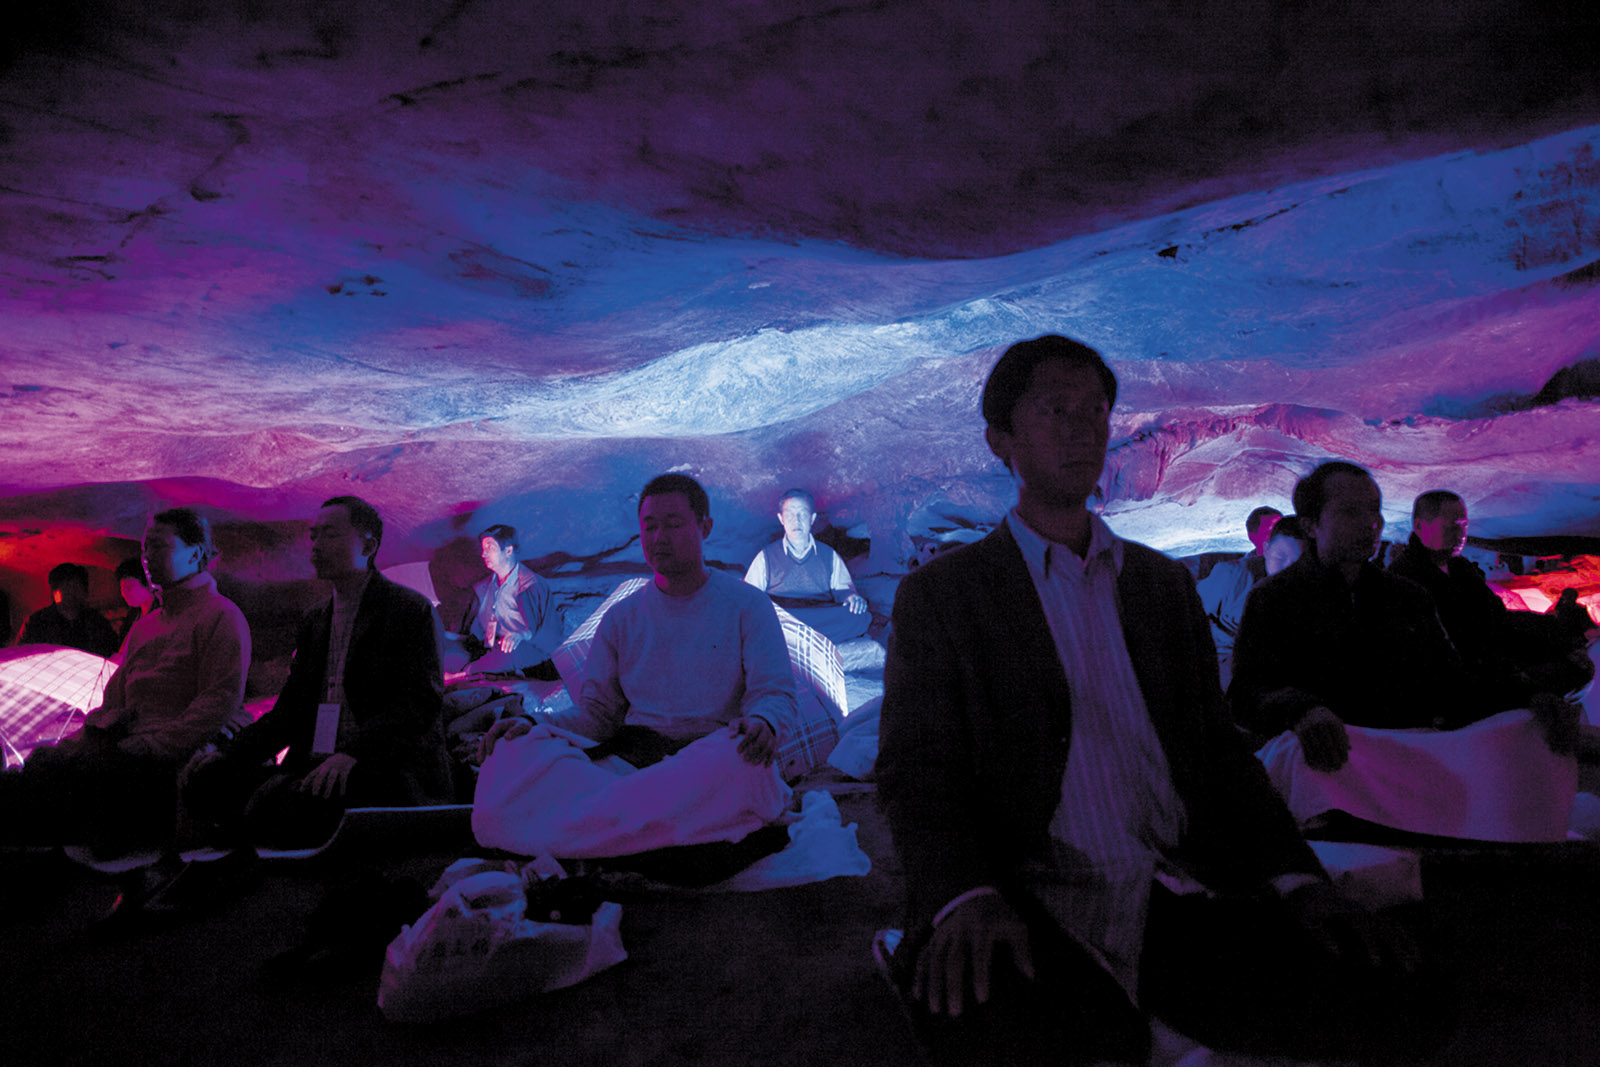 Daoist practitioners meditating in a cave in Jinhua, Zhejiang province, China, 2011